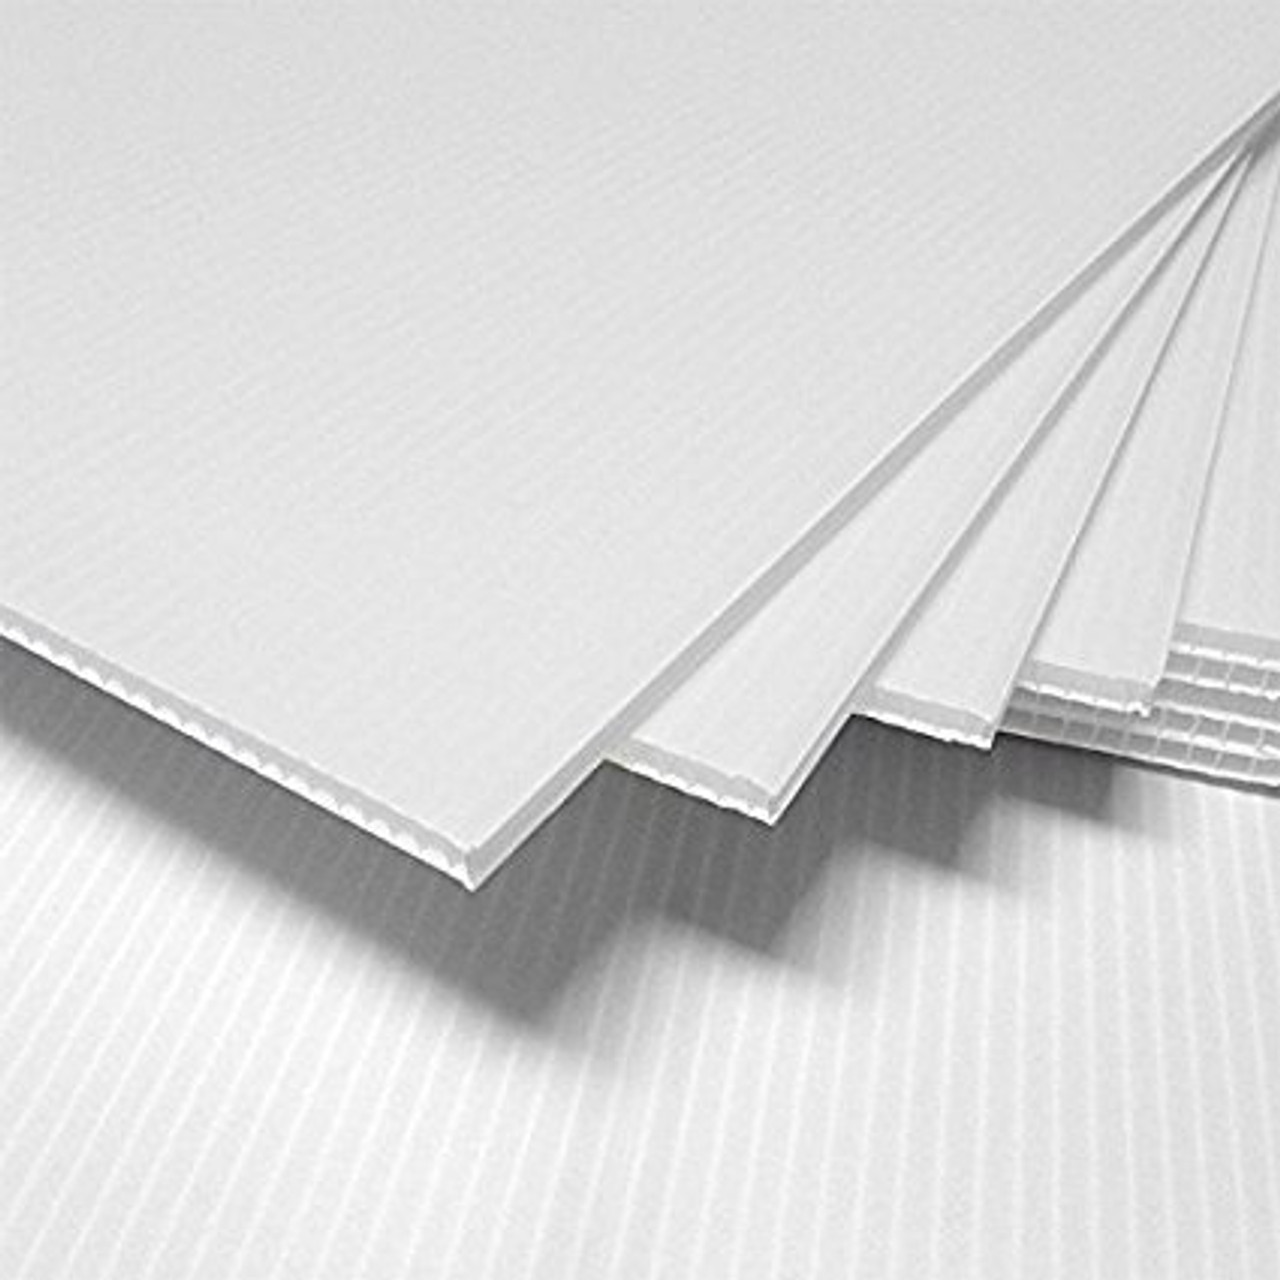 Recyclable Mounting Boards, 3/16 Corrugated, Heat-Activated, notFoam,  White/Kraft, 24 x 36 (20 Sheets) (Discontinued)